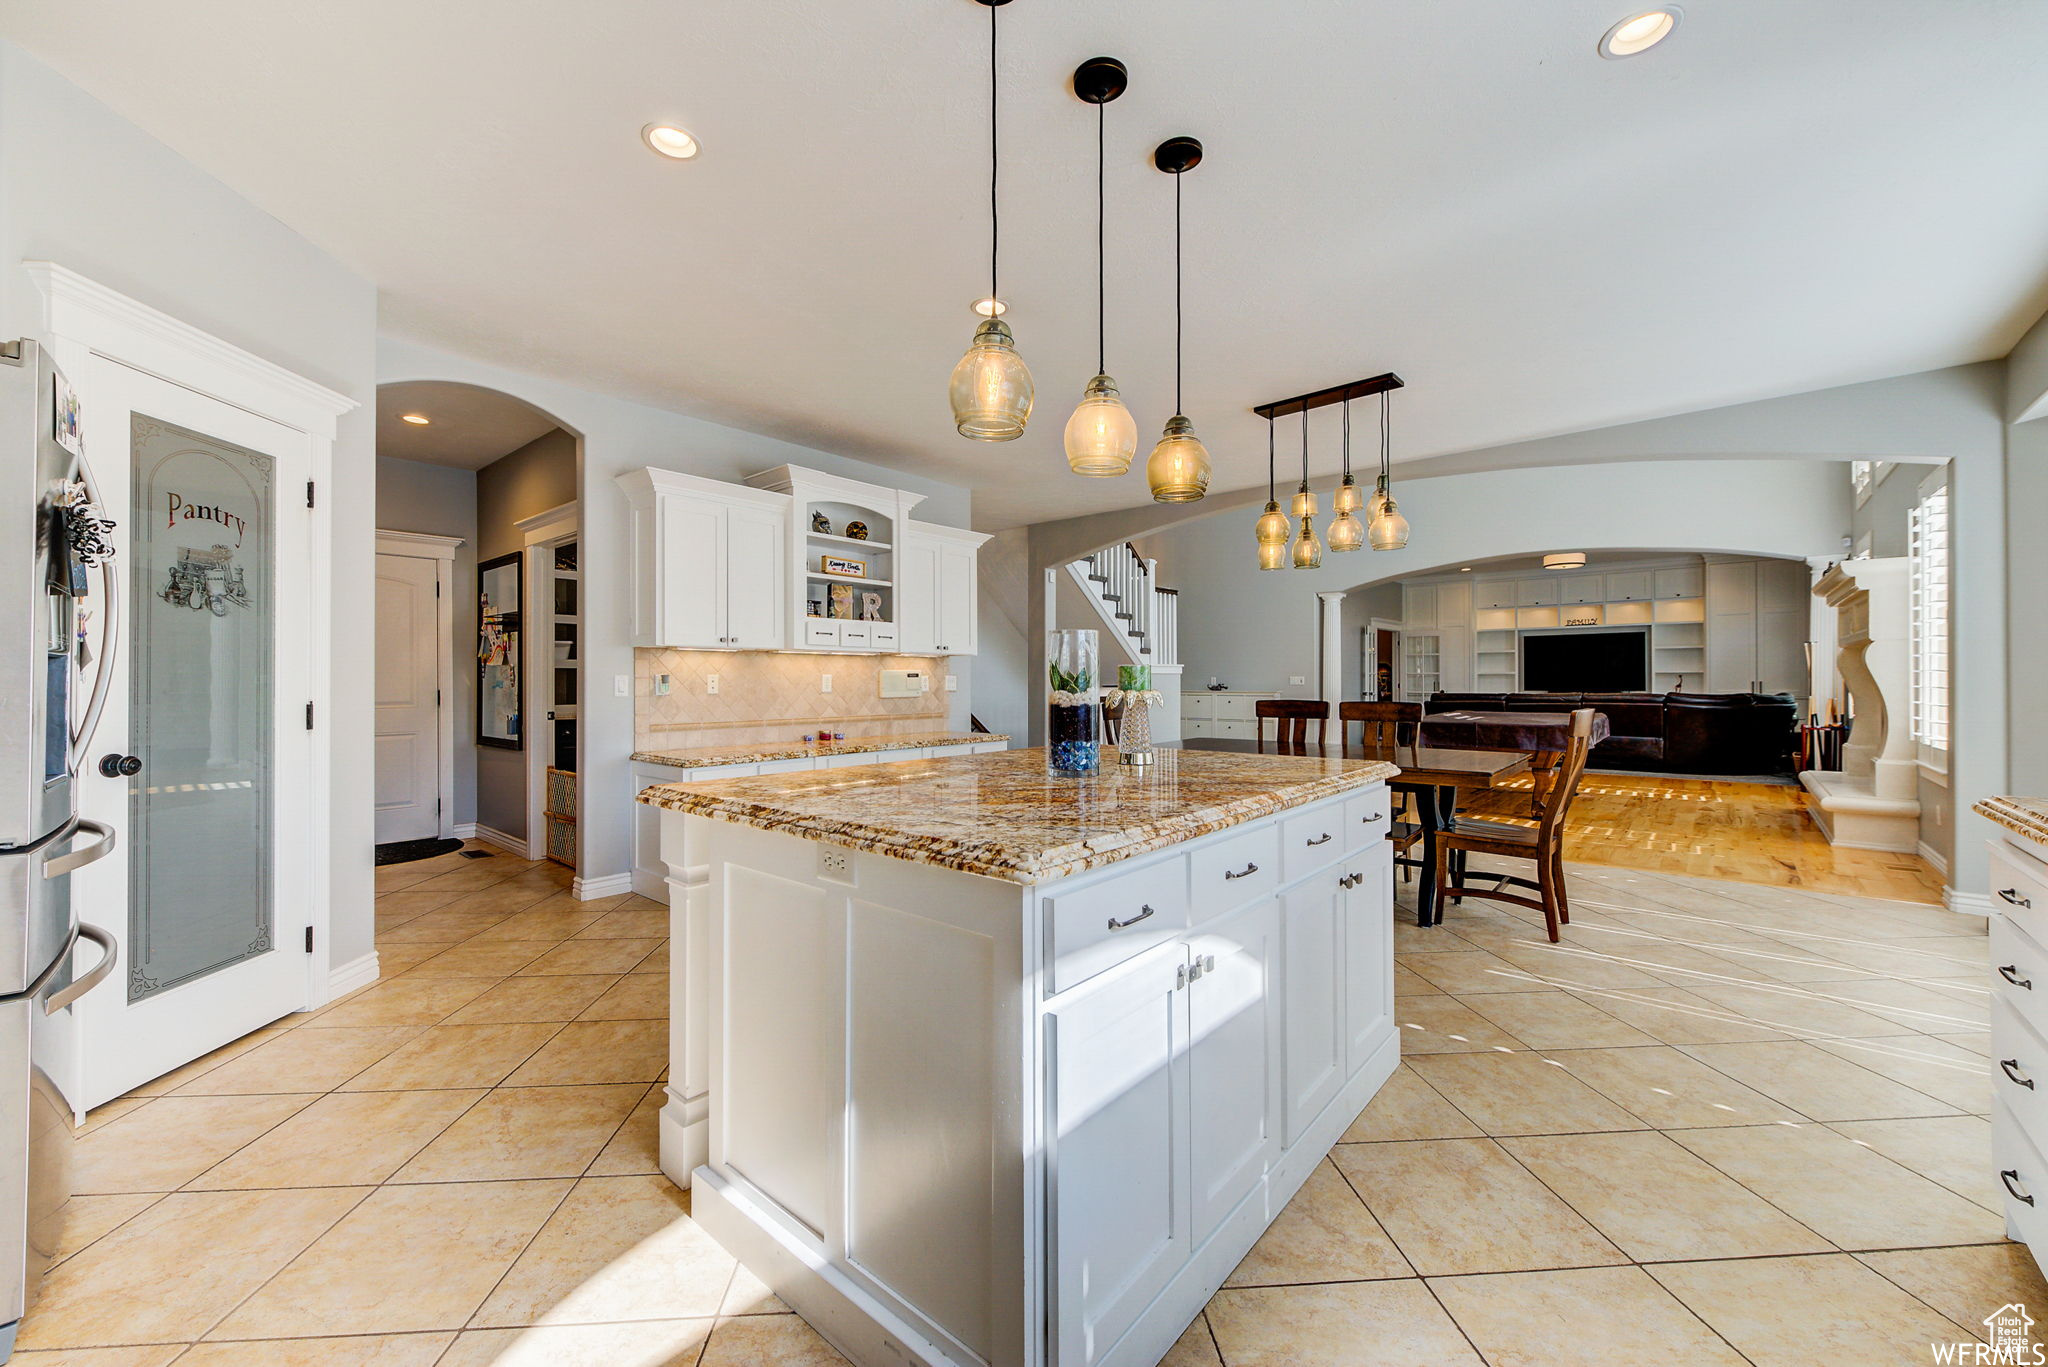 Kitchen featuring a kitchen island, hanging light fixtures, backsplash, and white cabinetry